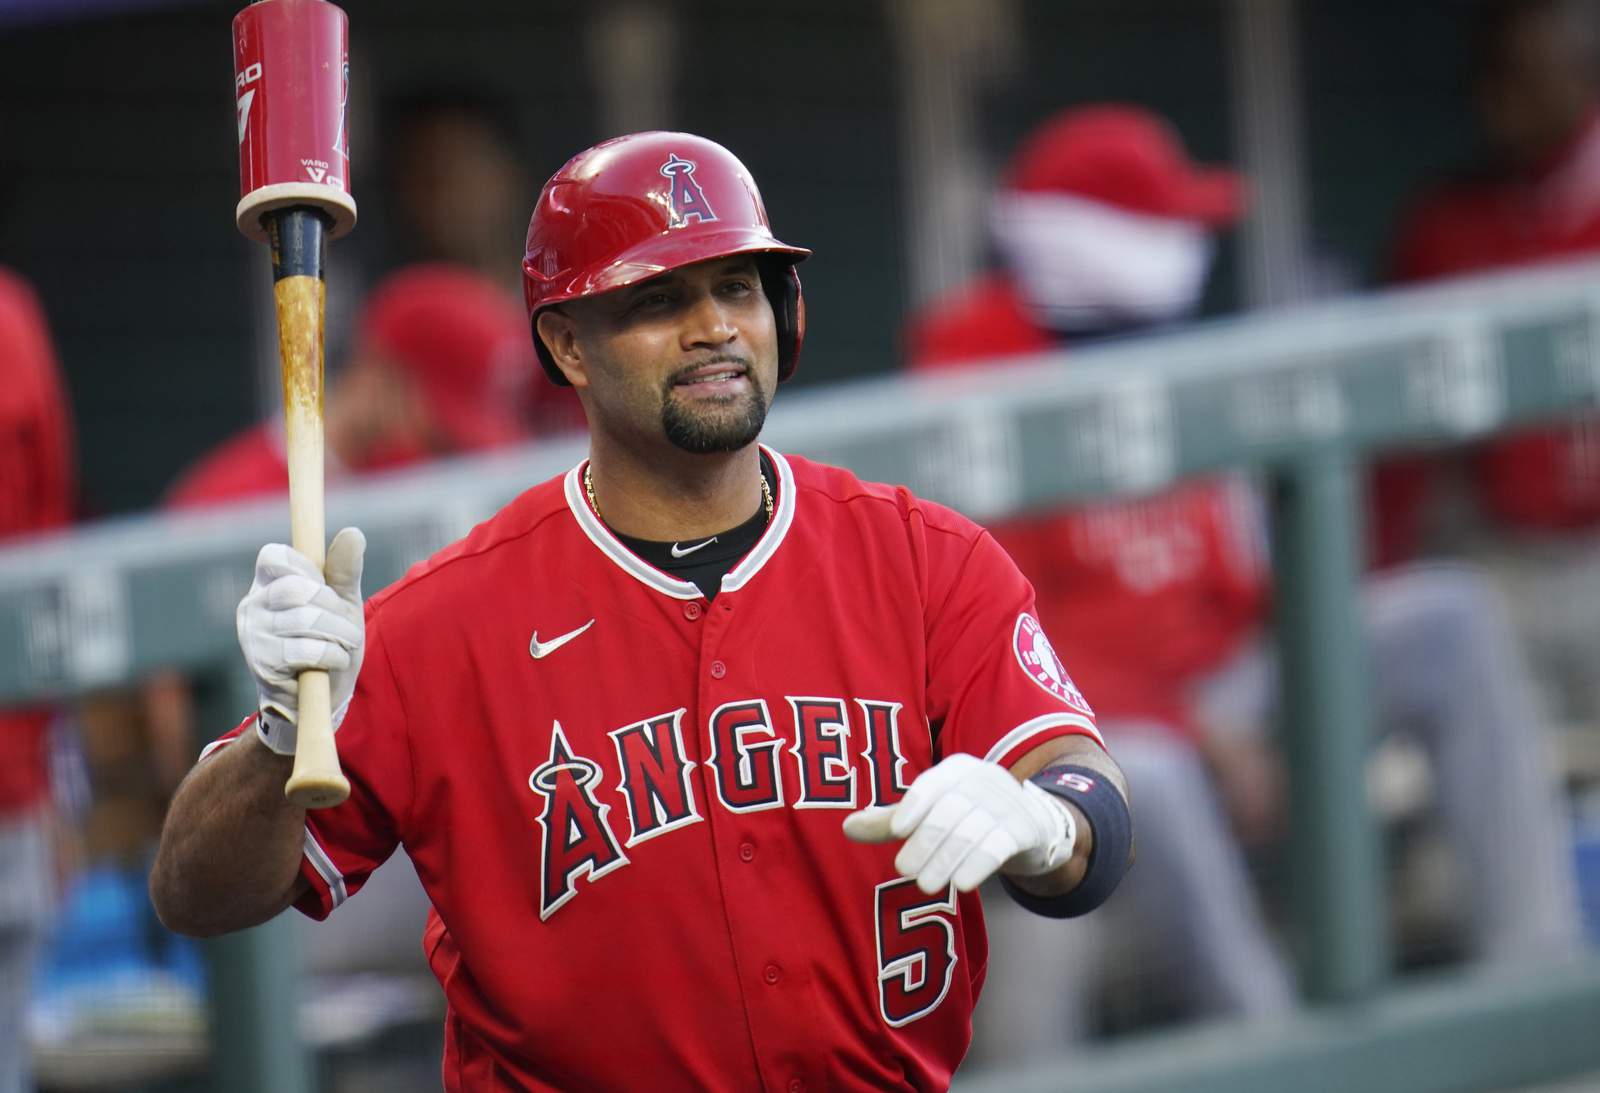 Pujols says he'll decide future after season with Angels